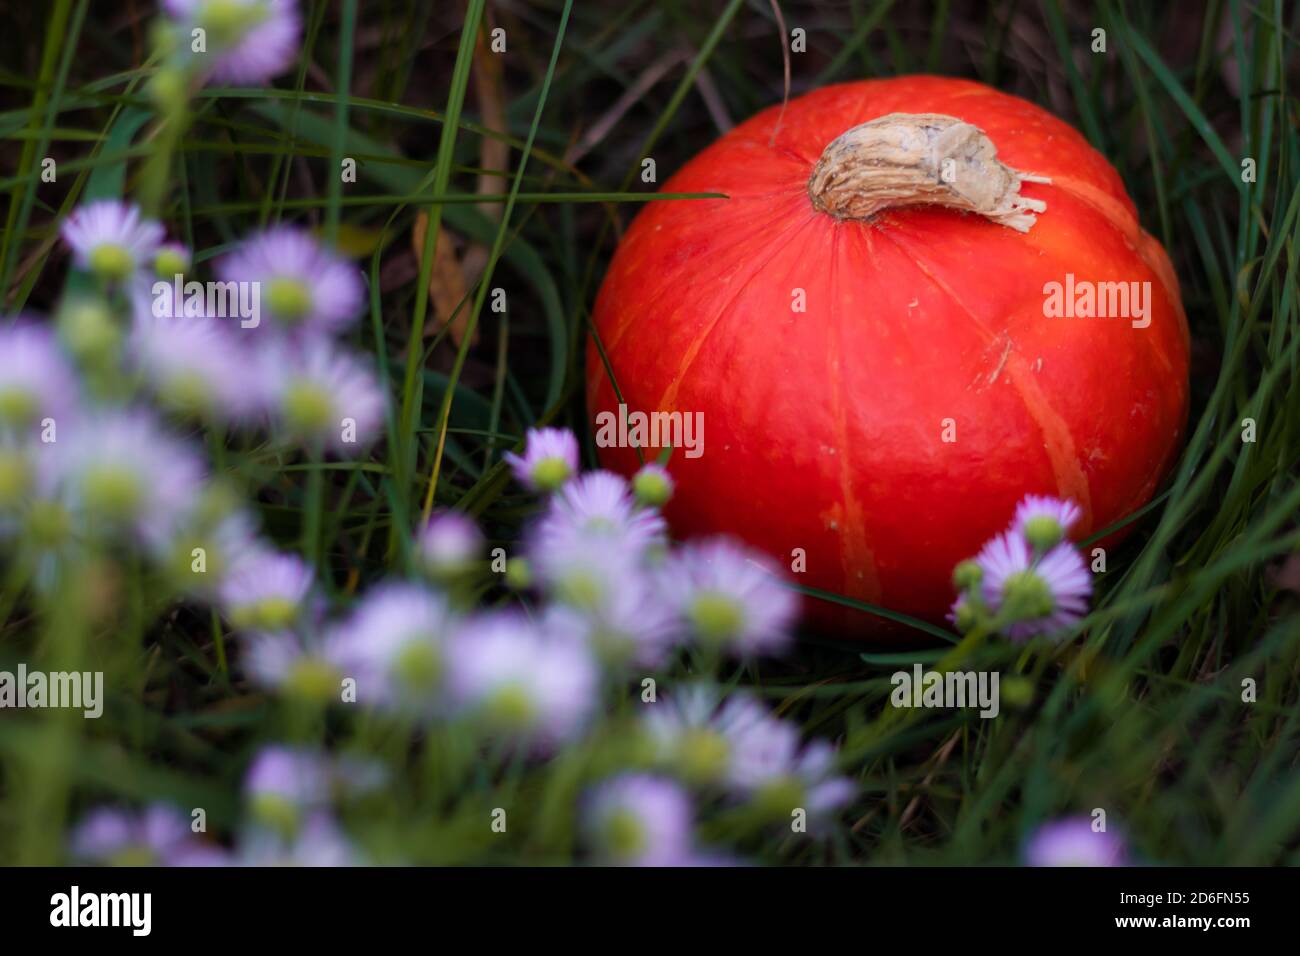 One round orange pumpkin in a green grass with contrast wildflowers. Stock Photo